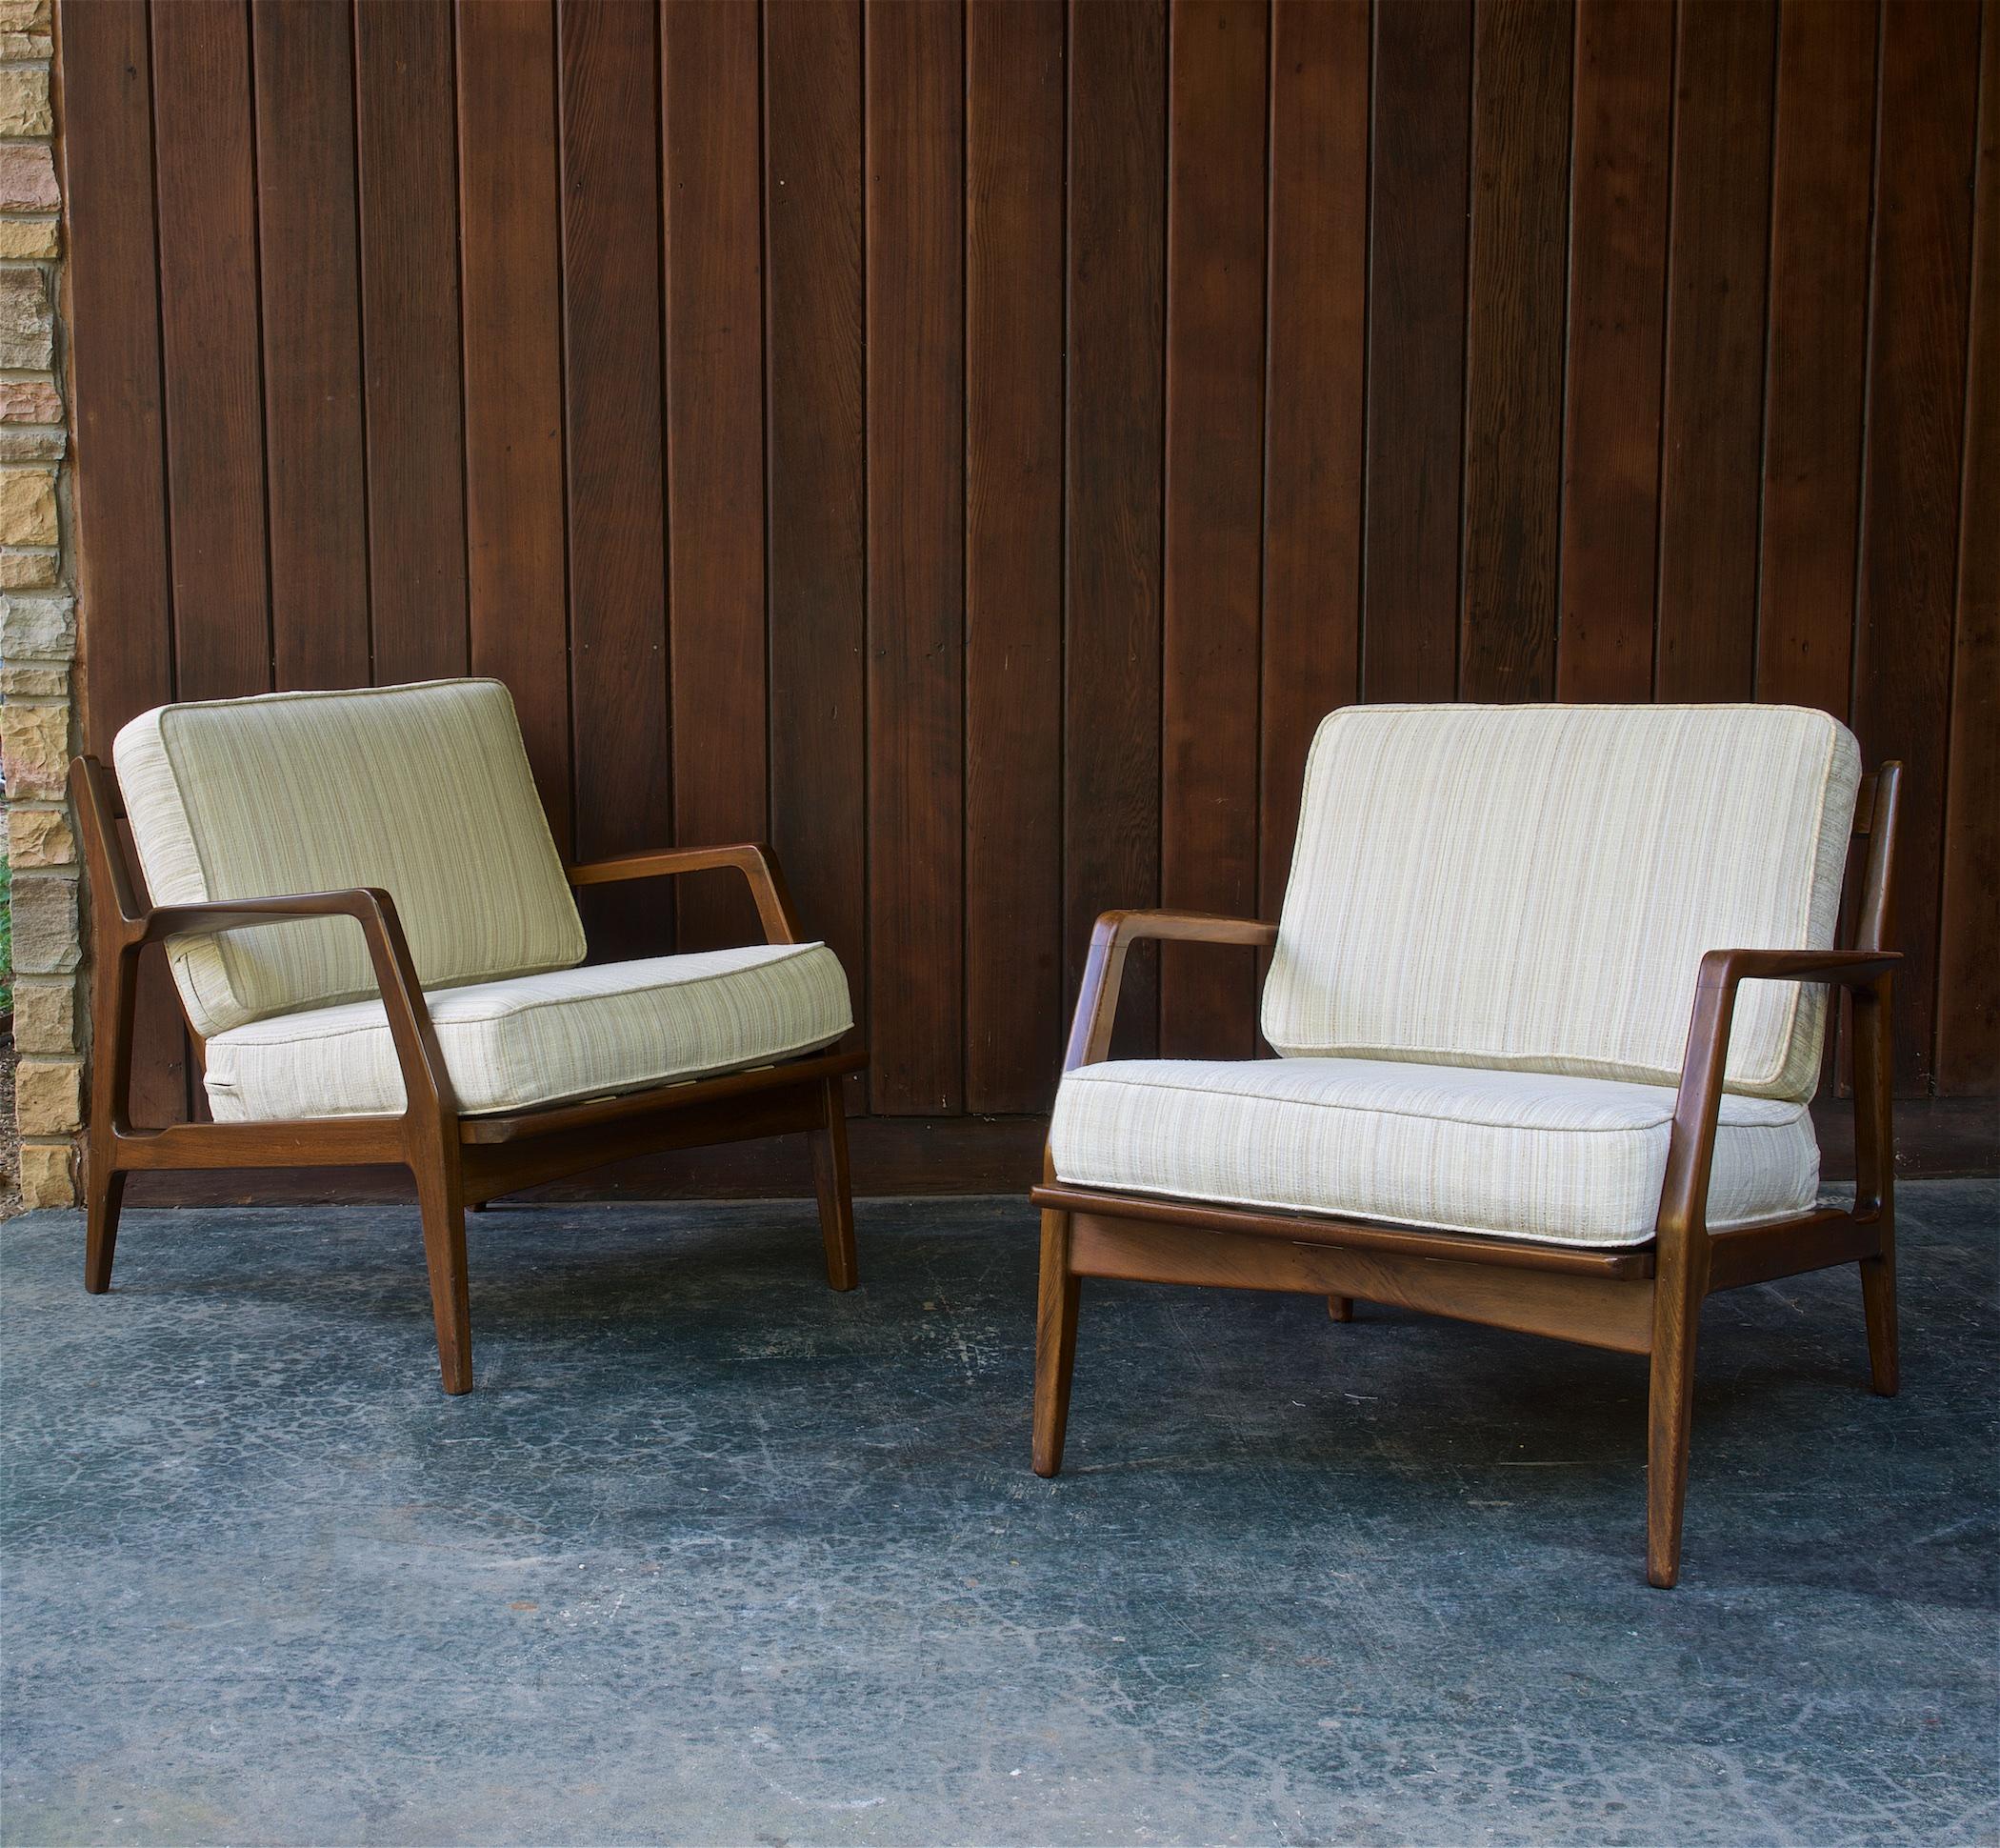 Wonderful pair of Danish 1950s Scandinavian armchair lounge chairs. Solid beech wood frames are without cracks but do with some wear to the lacquer finish, they are in unrestored as-found condition. Fin shaped spindle backs, wide outstretched